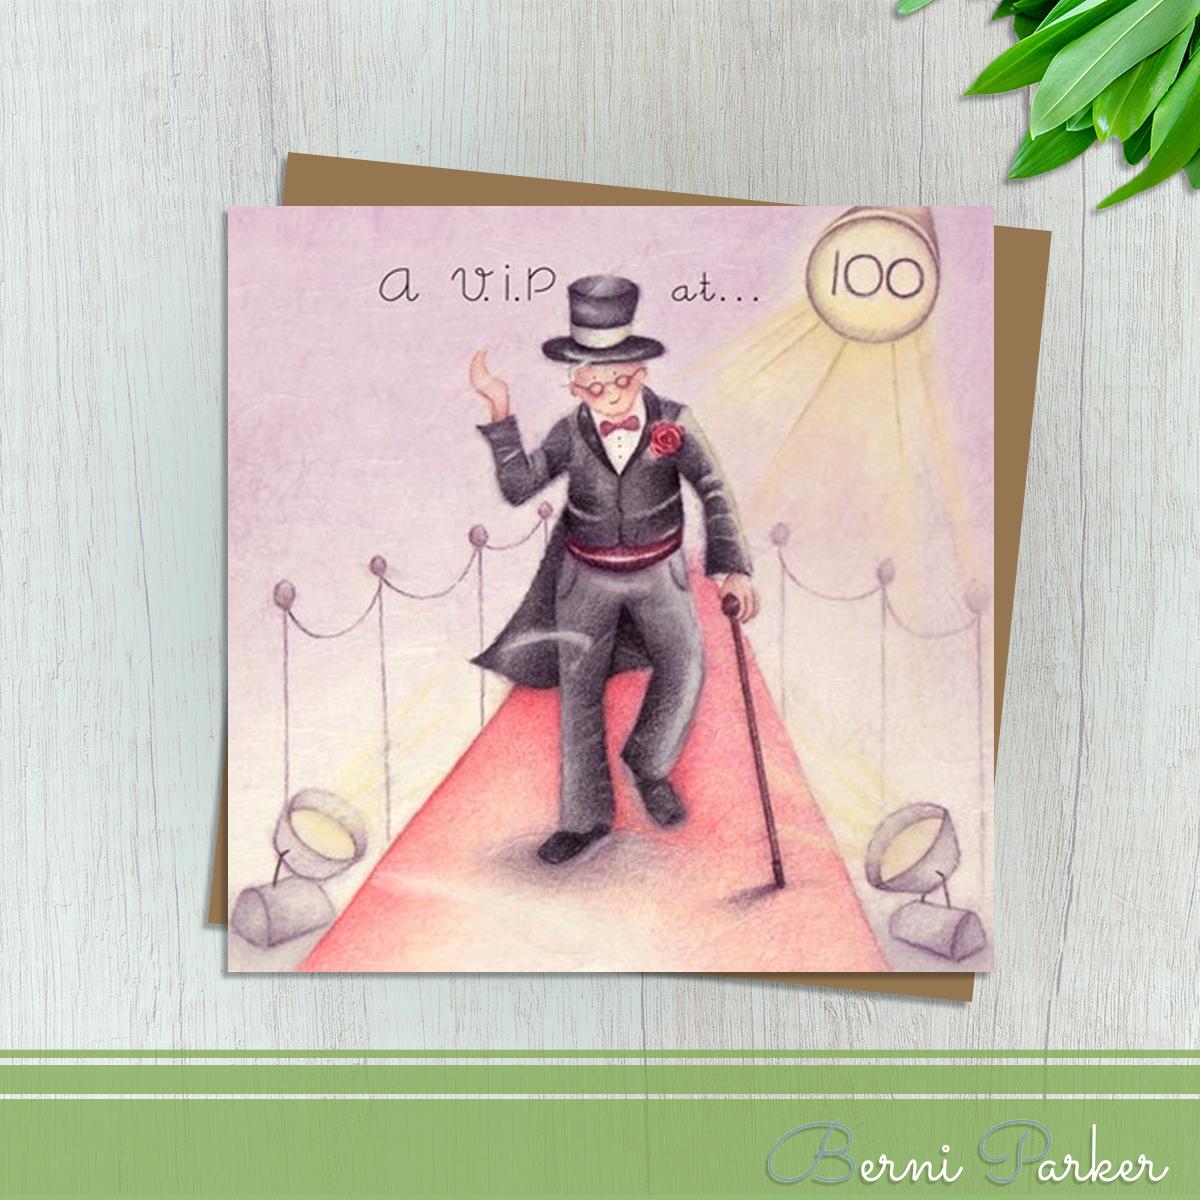 Showing A Gentleman In Top Hat And Tails Walking Along The Red Carpet Under Spotlights. Caption: A V.I.P at 100. Blank Inside For Your Own Message. Complete With Brown Kraft Envelope